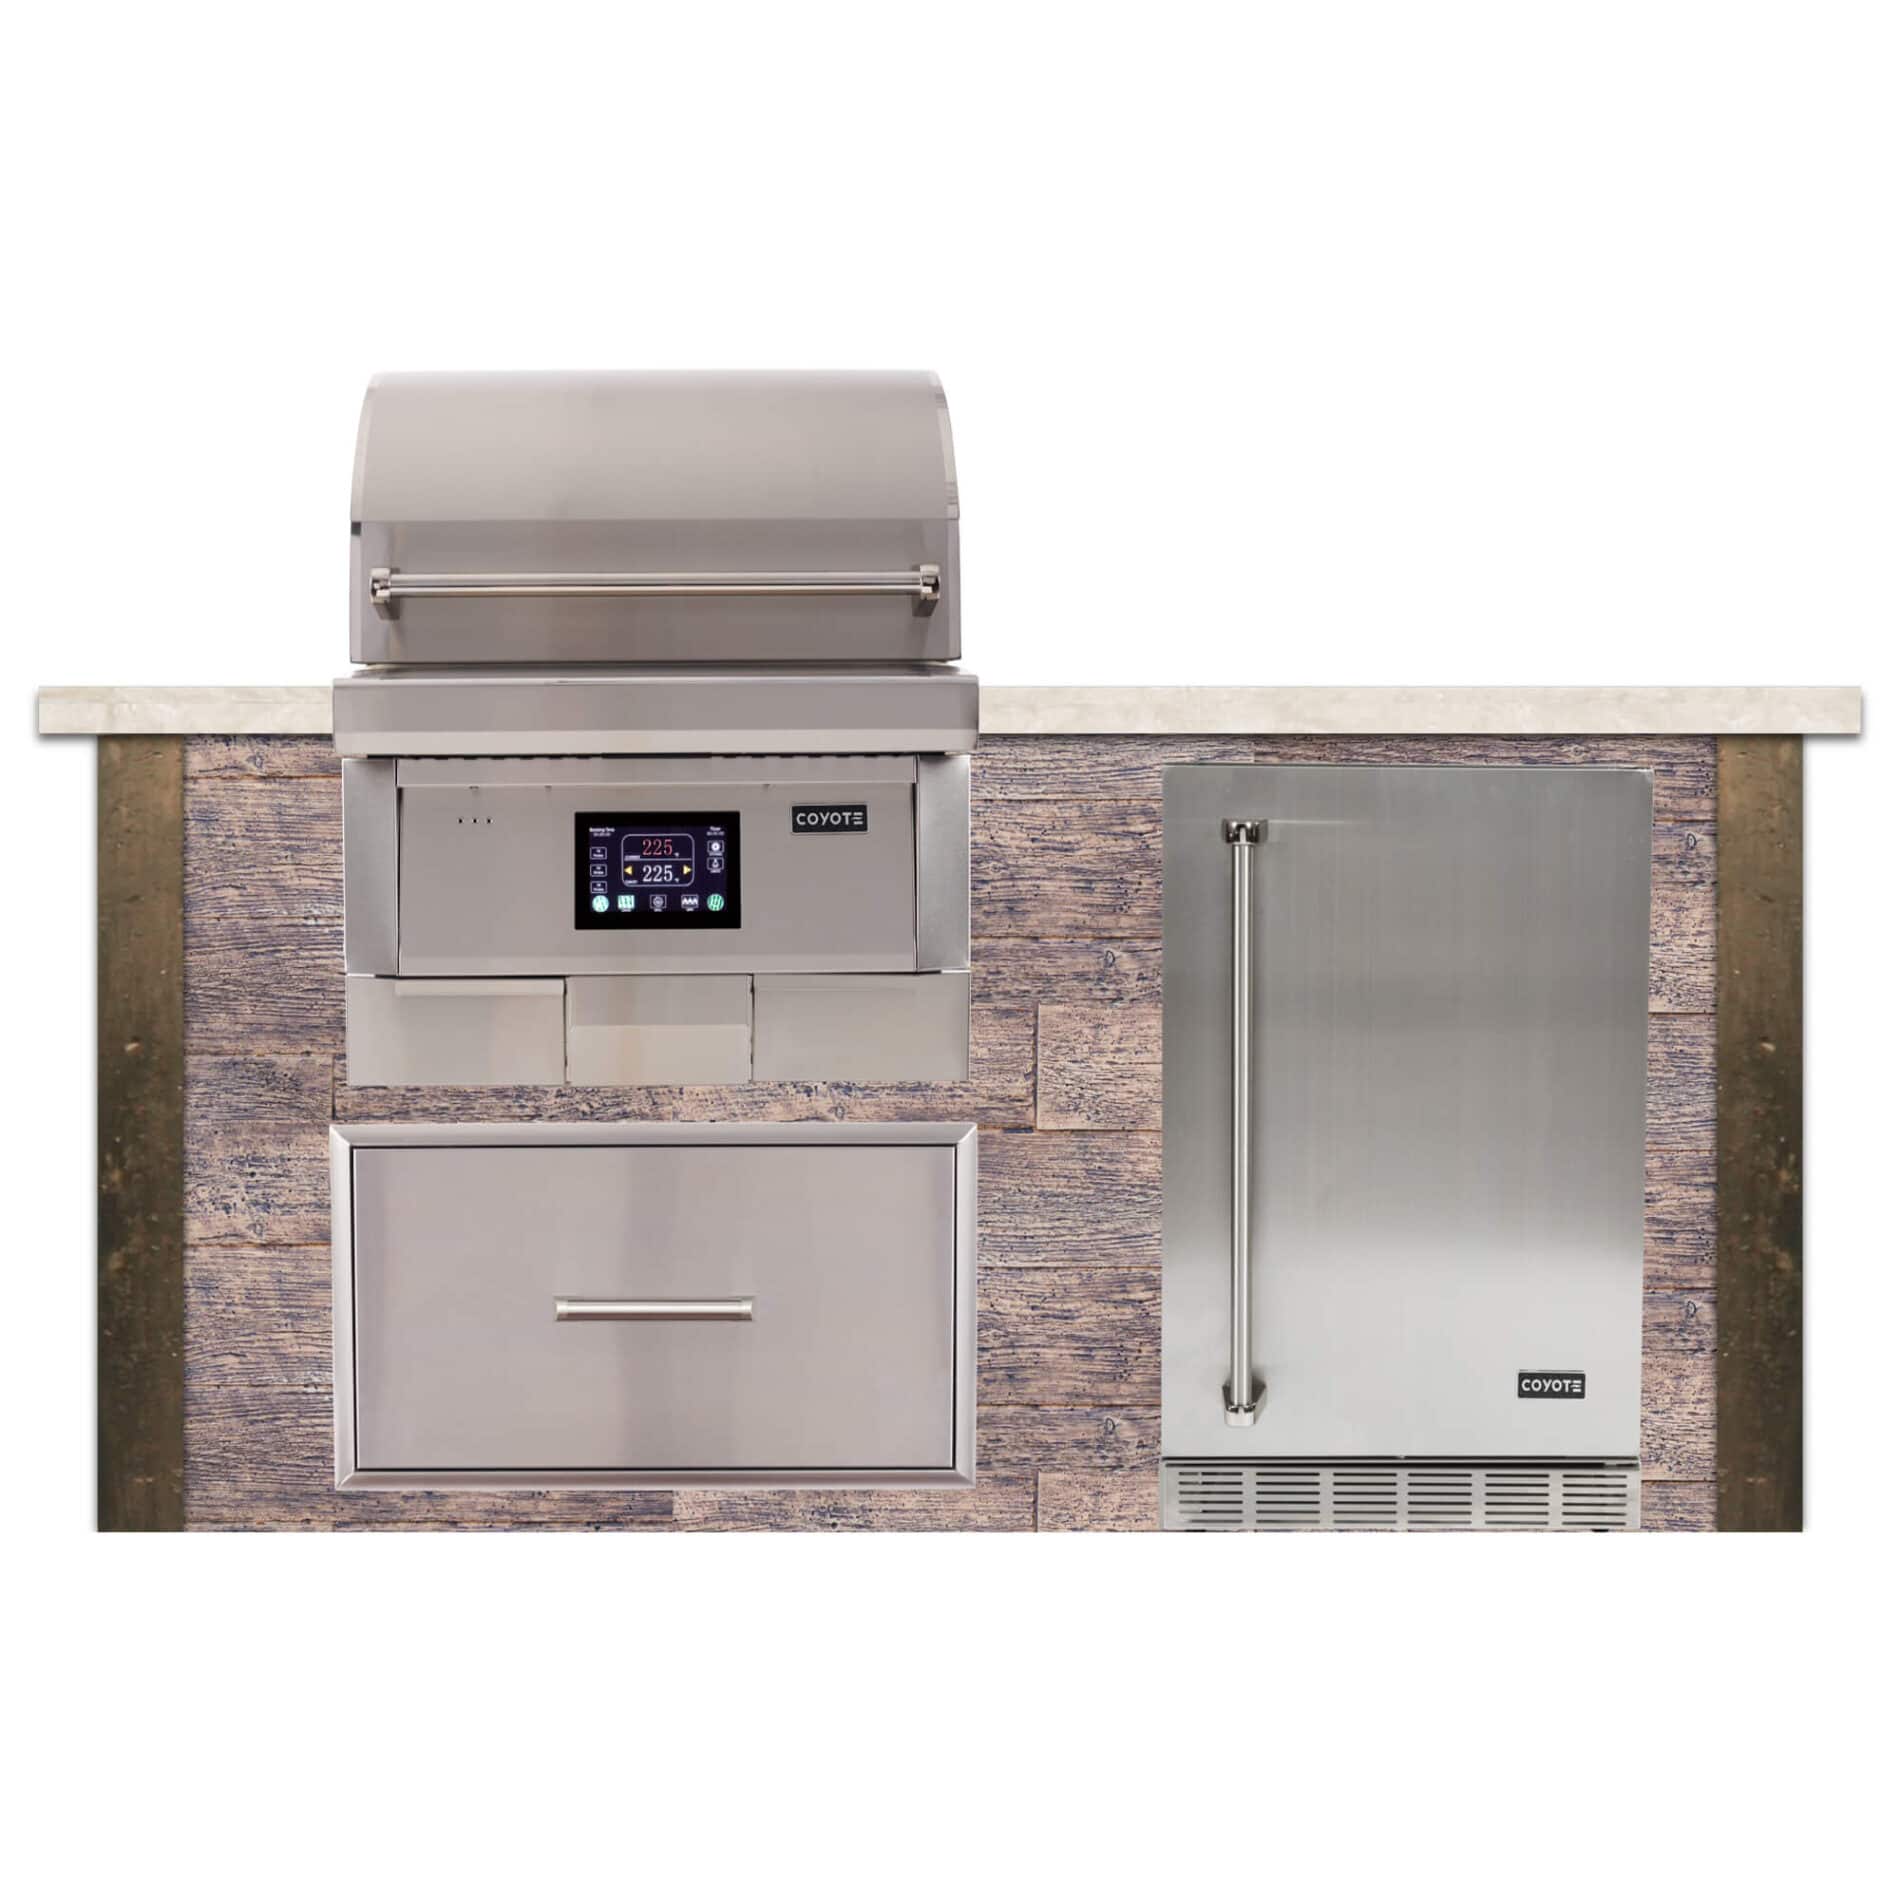 6 Pellet Grill Island Weathered Wood Wood Brown Coyote Outdoor Living,Gas Dryer Vs Electric Dryer Cost